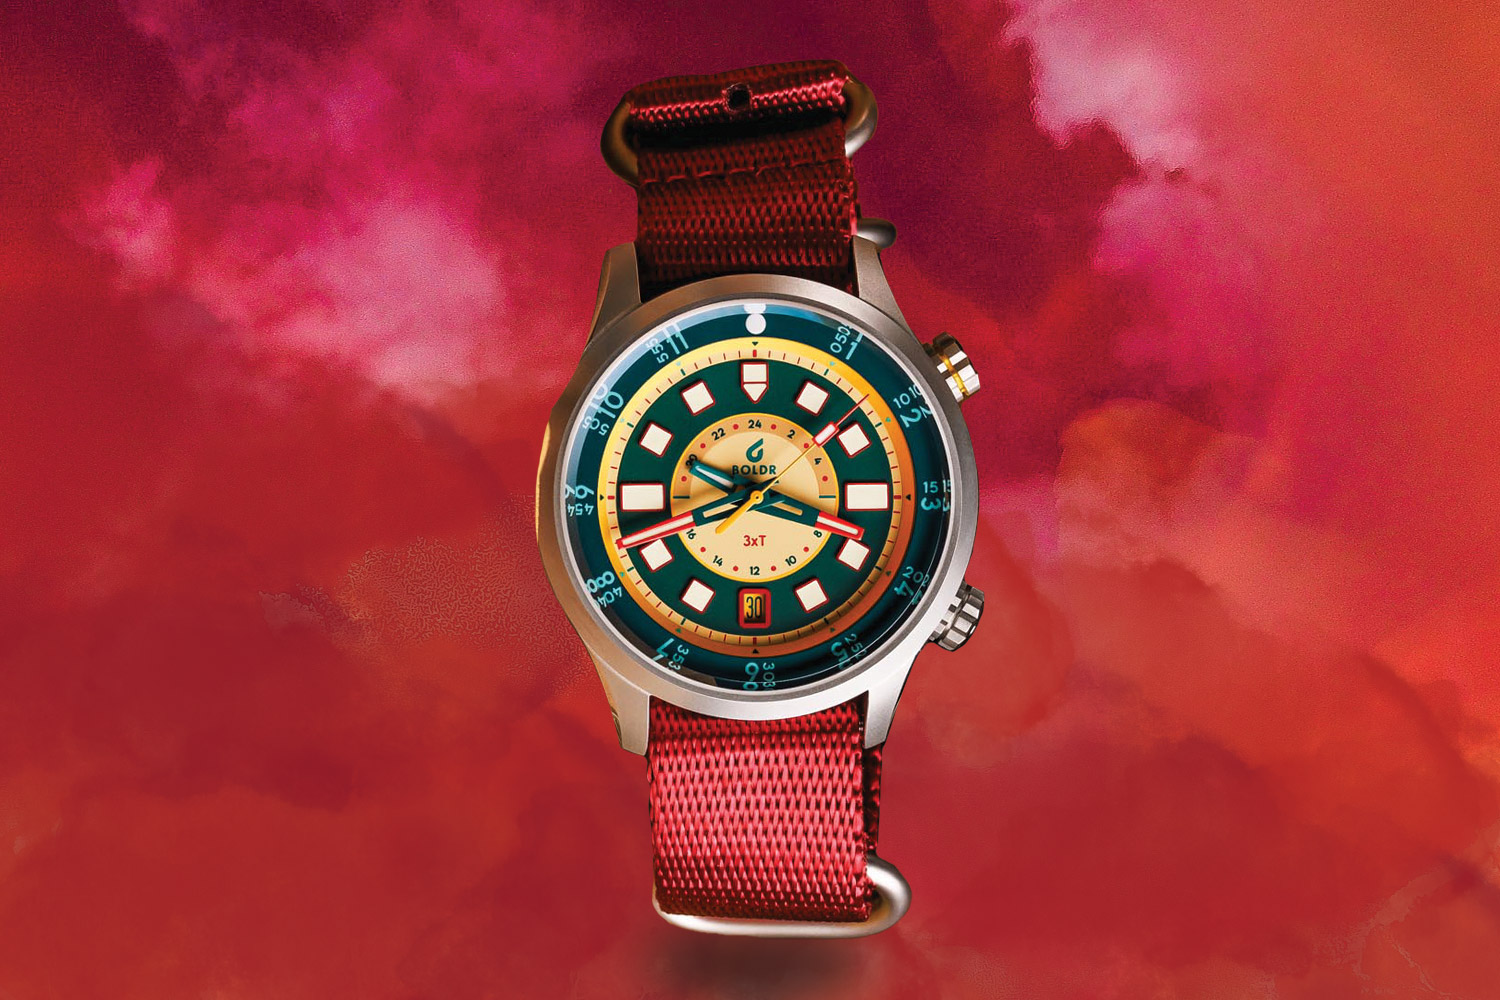 Red, yellow and green Boldr X Worn & Wound 3XT GMT Limited Edition